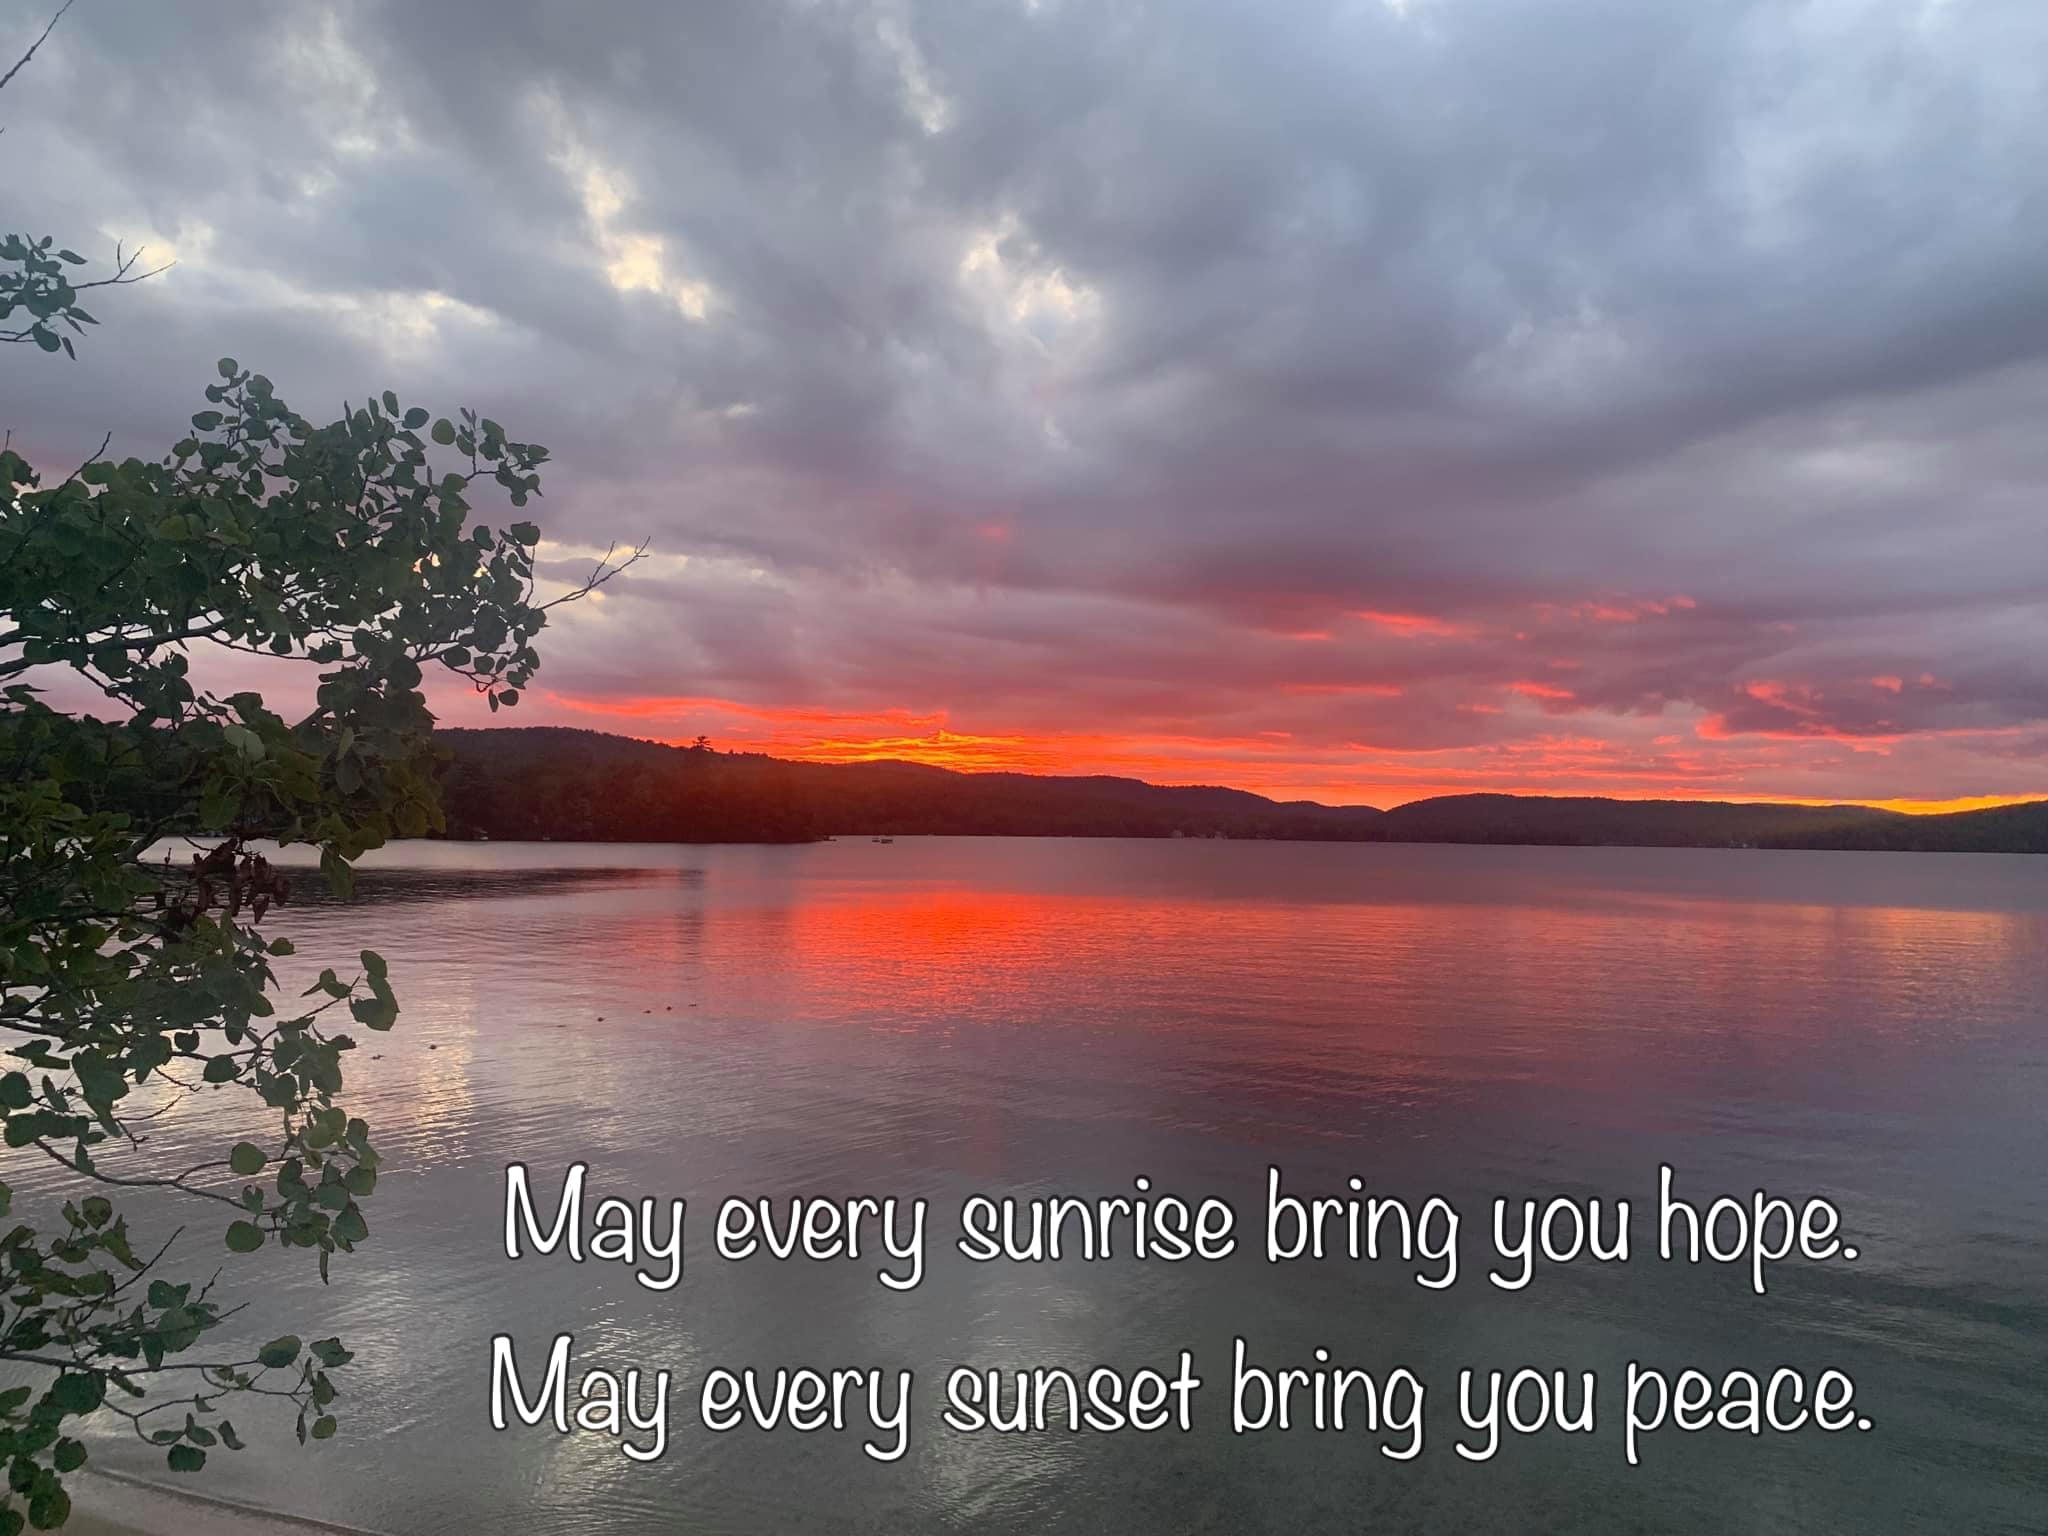 May every sunrise bring you hope. May every sunset bring you peace